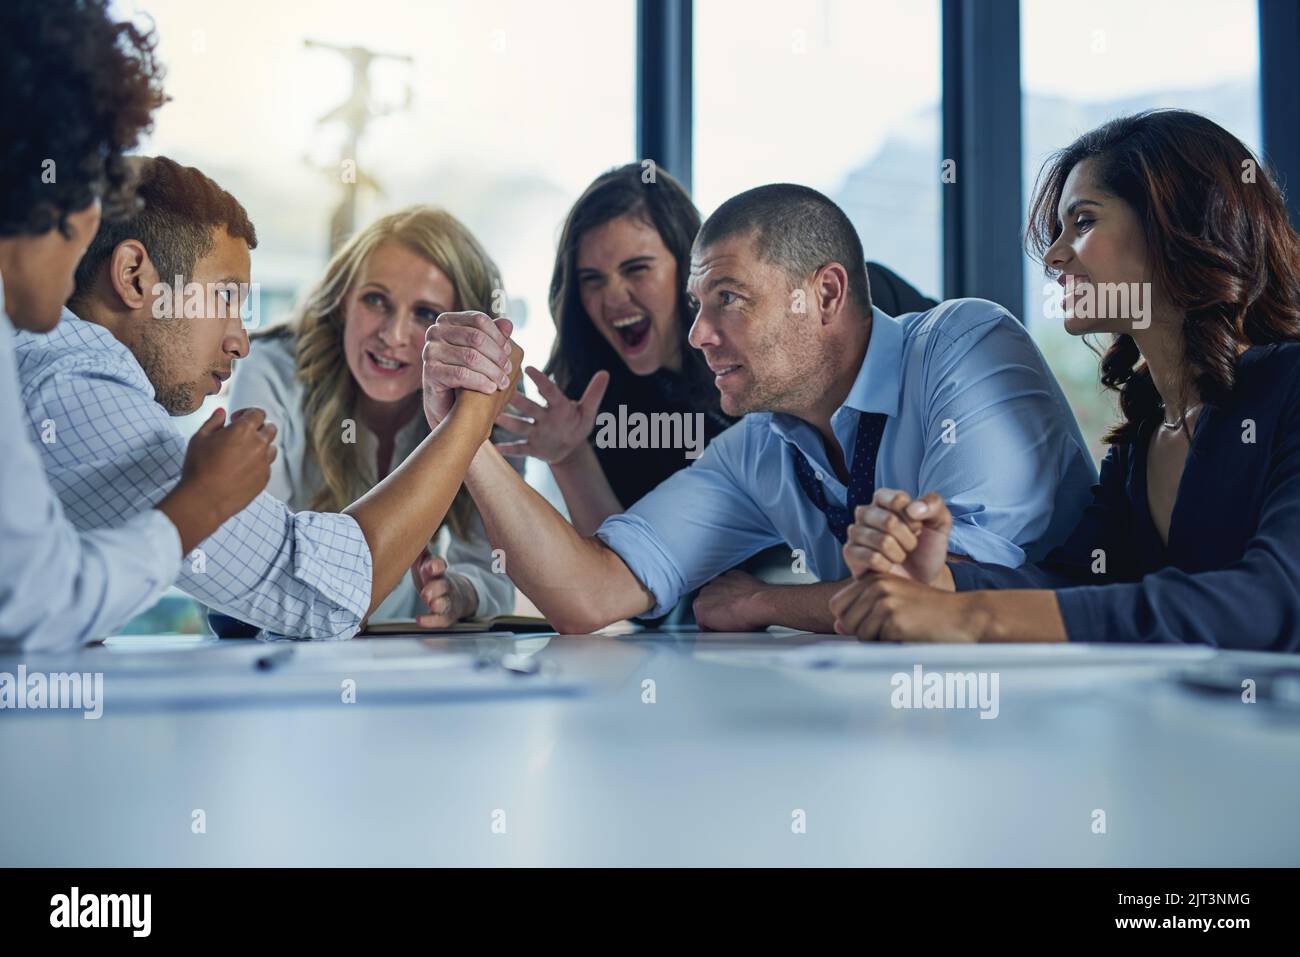 Its a business standoff. two businesspeople arm wrestling during a meeting in the boardroom. Stock Photo